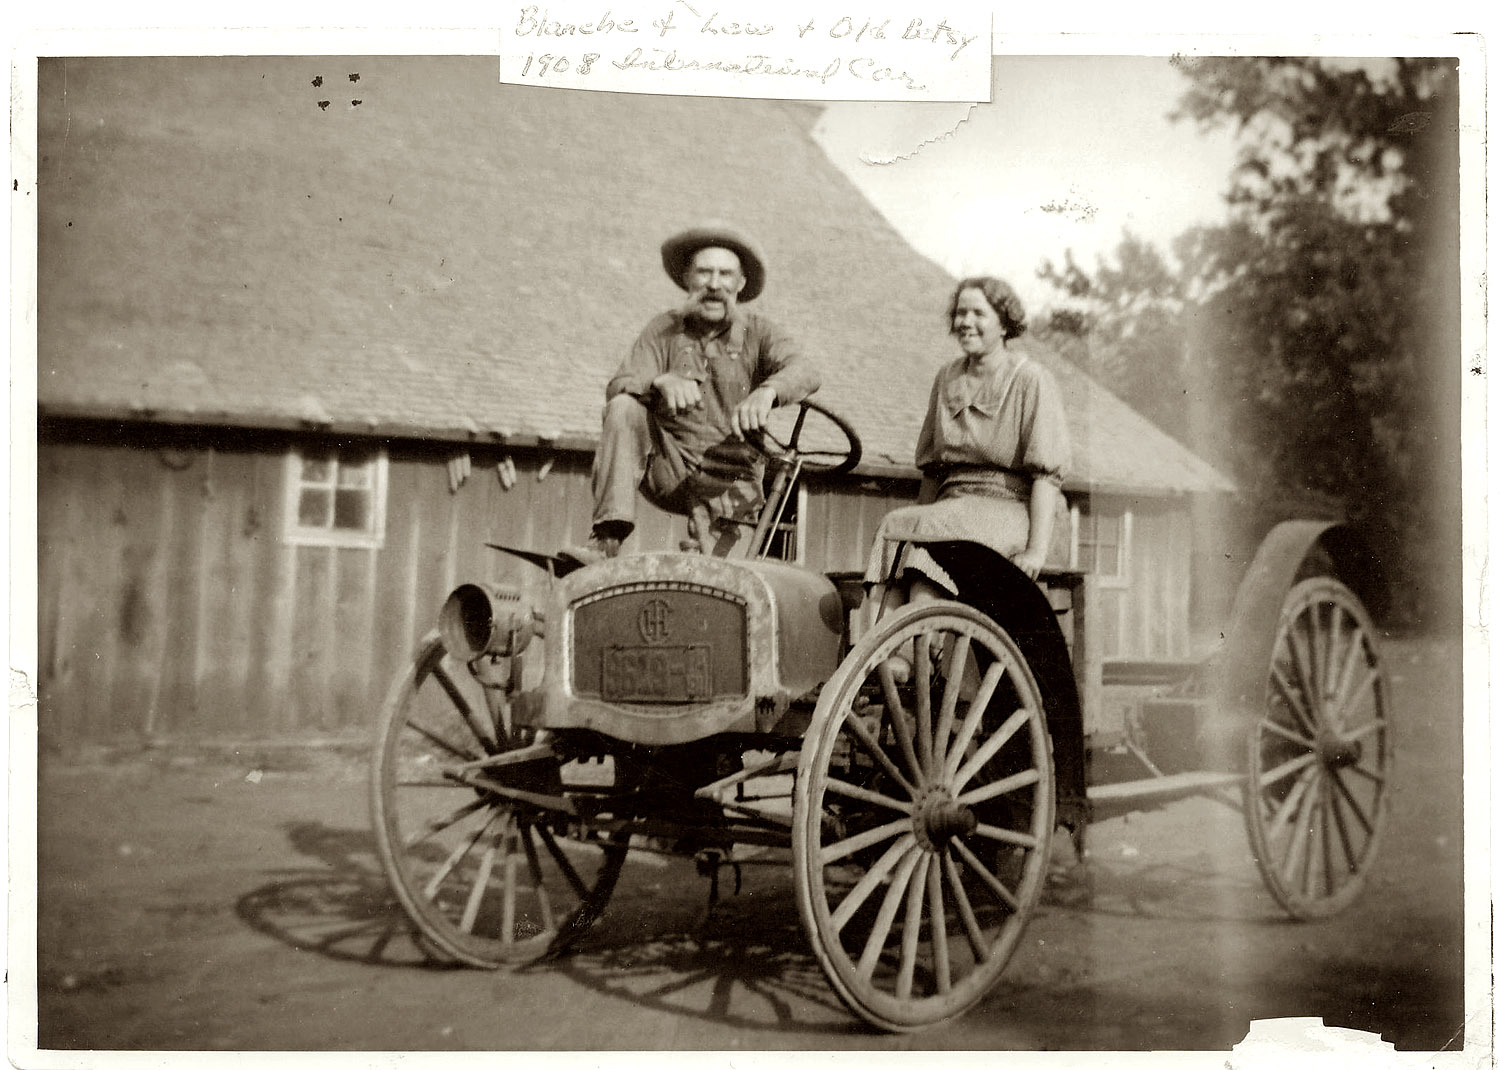 Old Betsy is the car not the woman [wink] ... a "1908 International" according to the picture (International Harvester). My great-grandparents were farmers in Iowa.